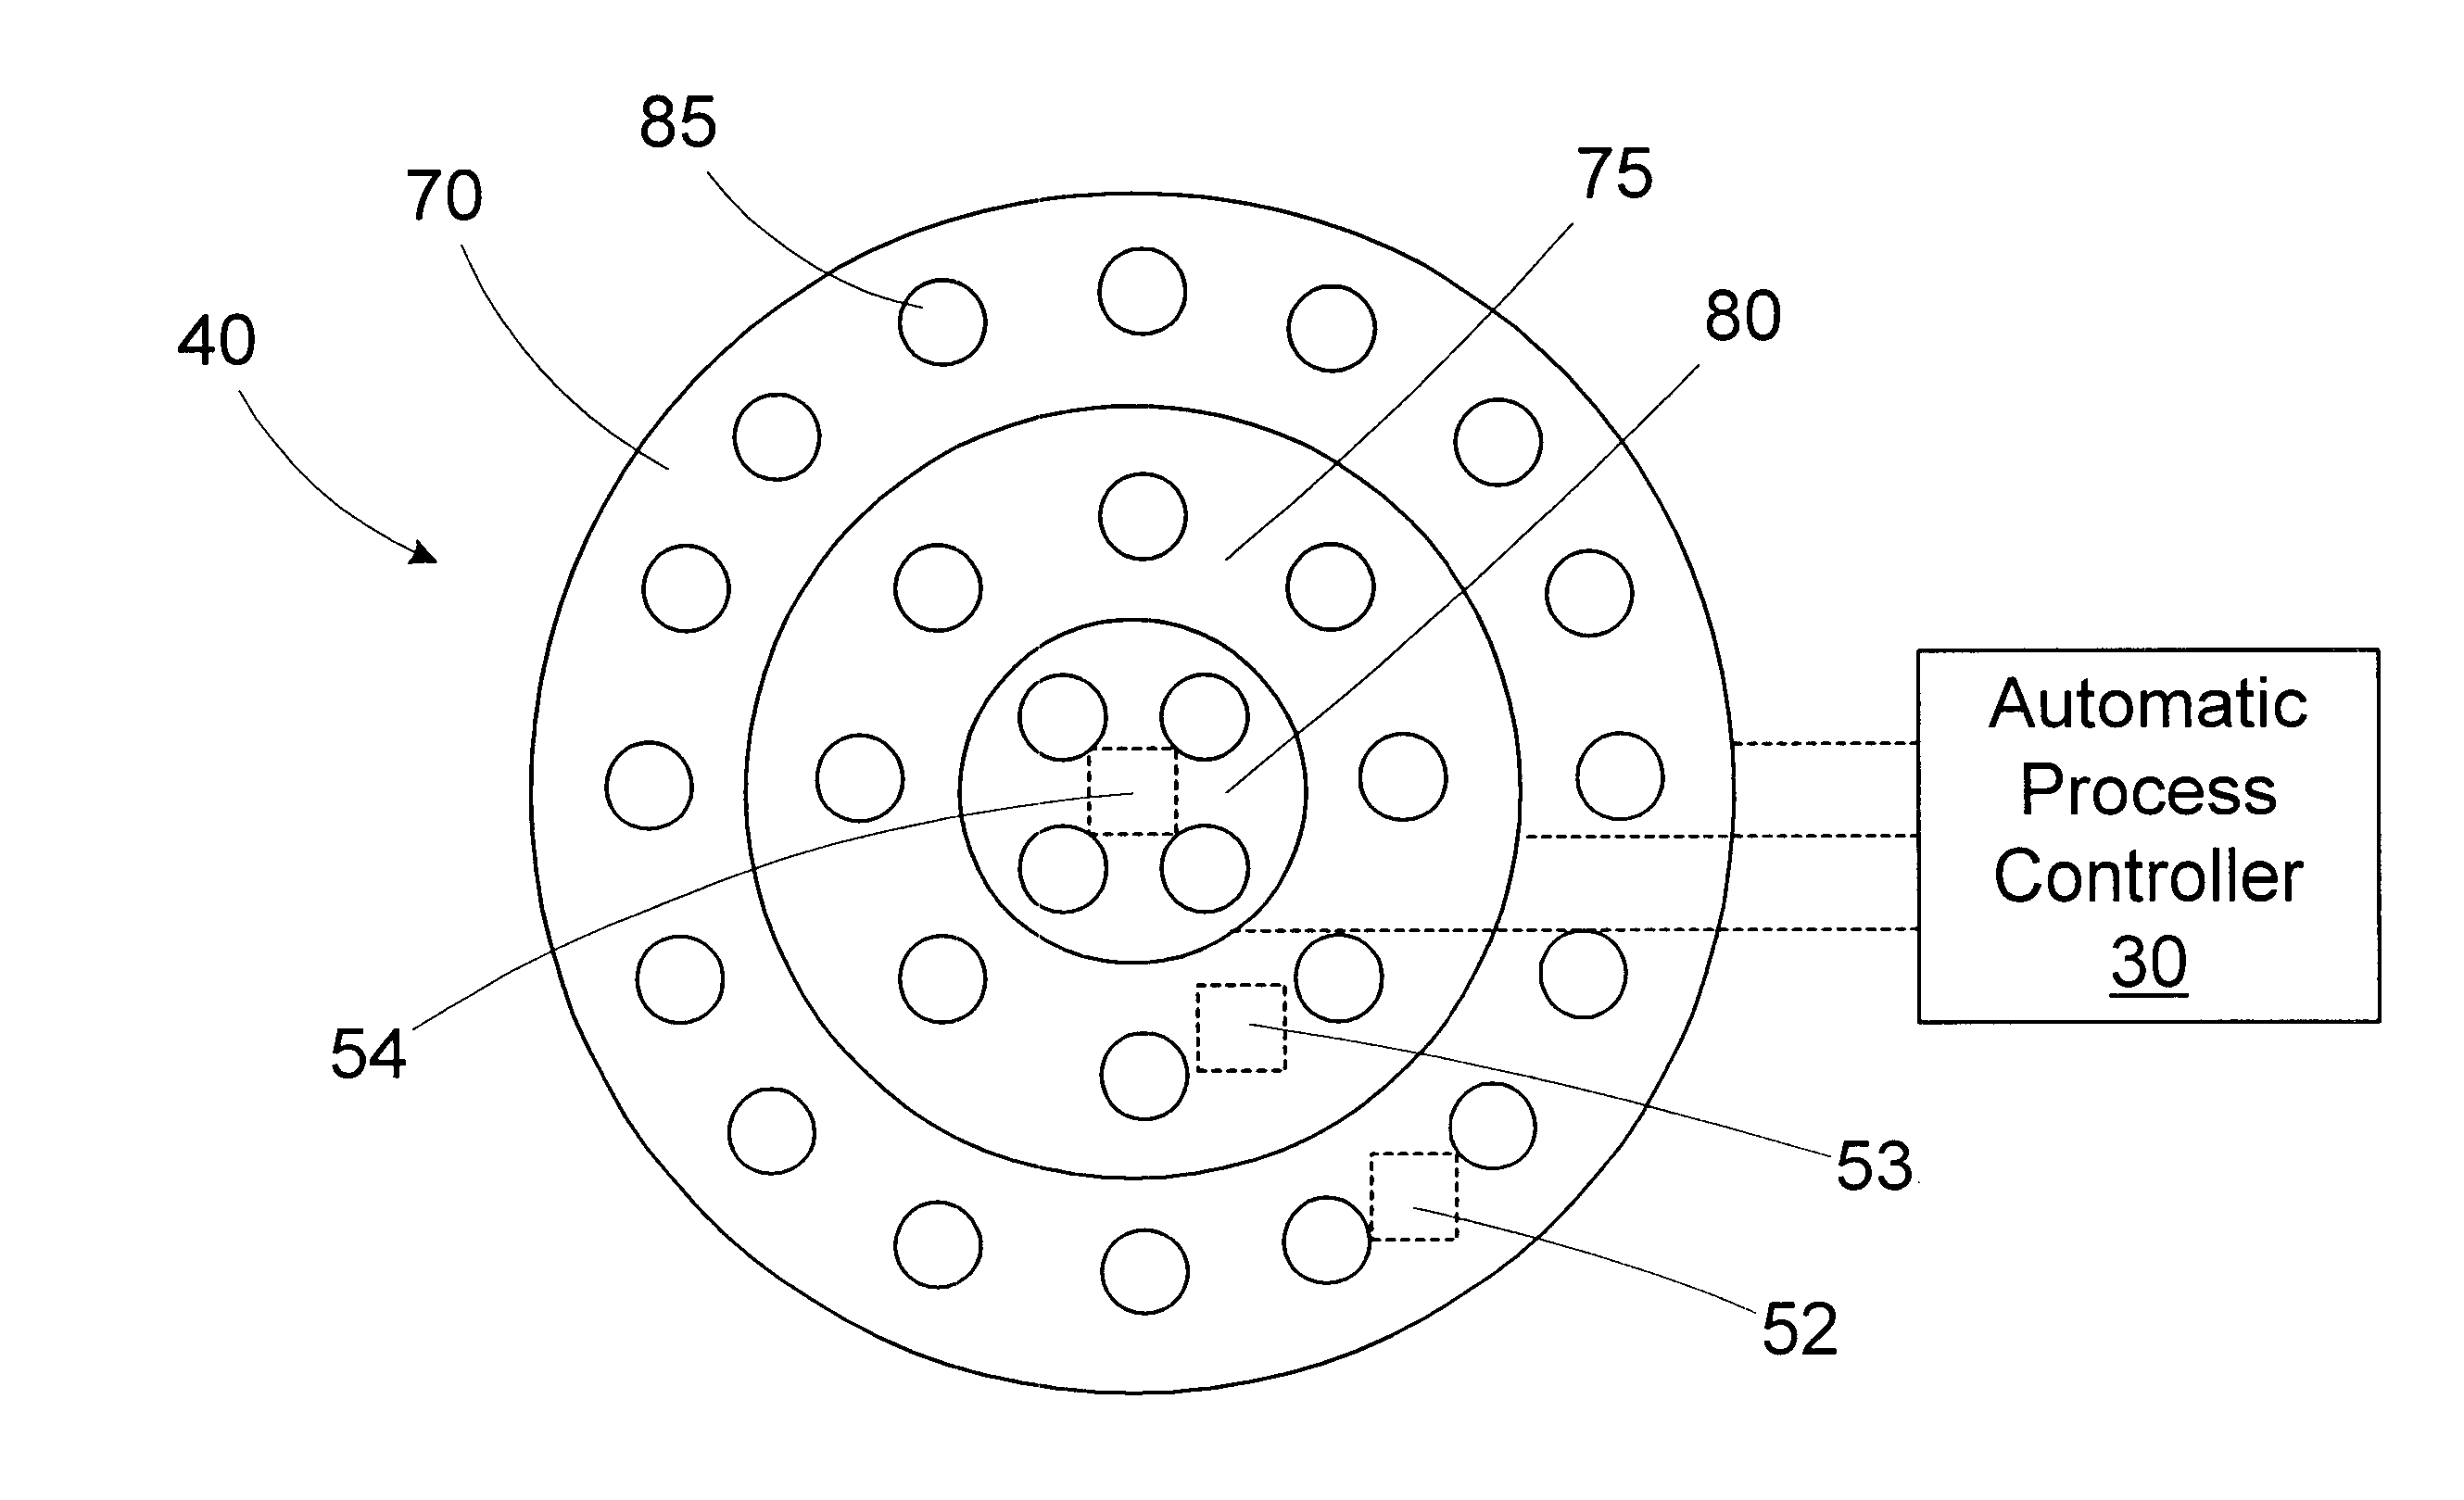 Method and apparatus for controlling wafer uniformity using spatially resolved sensors